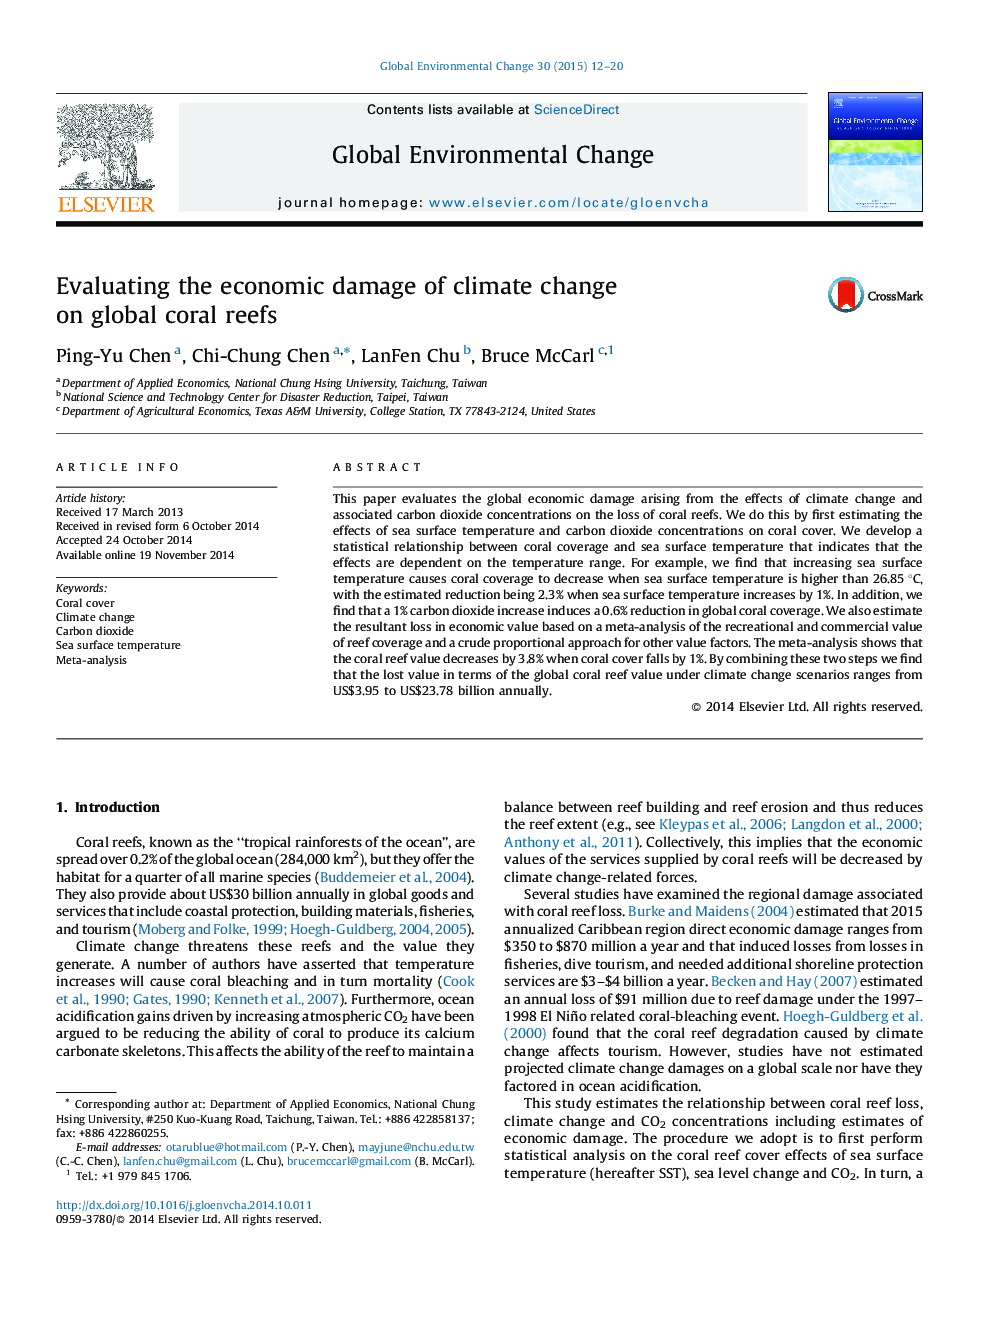 Evaluating the economic damage of climate change on global coral reefs